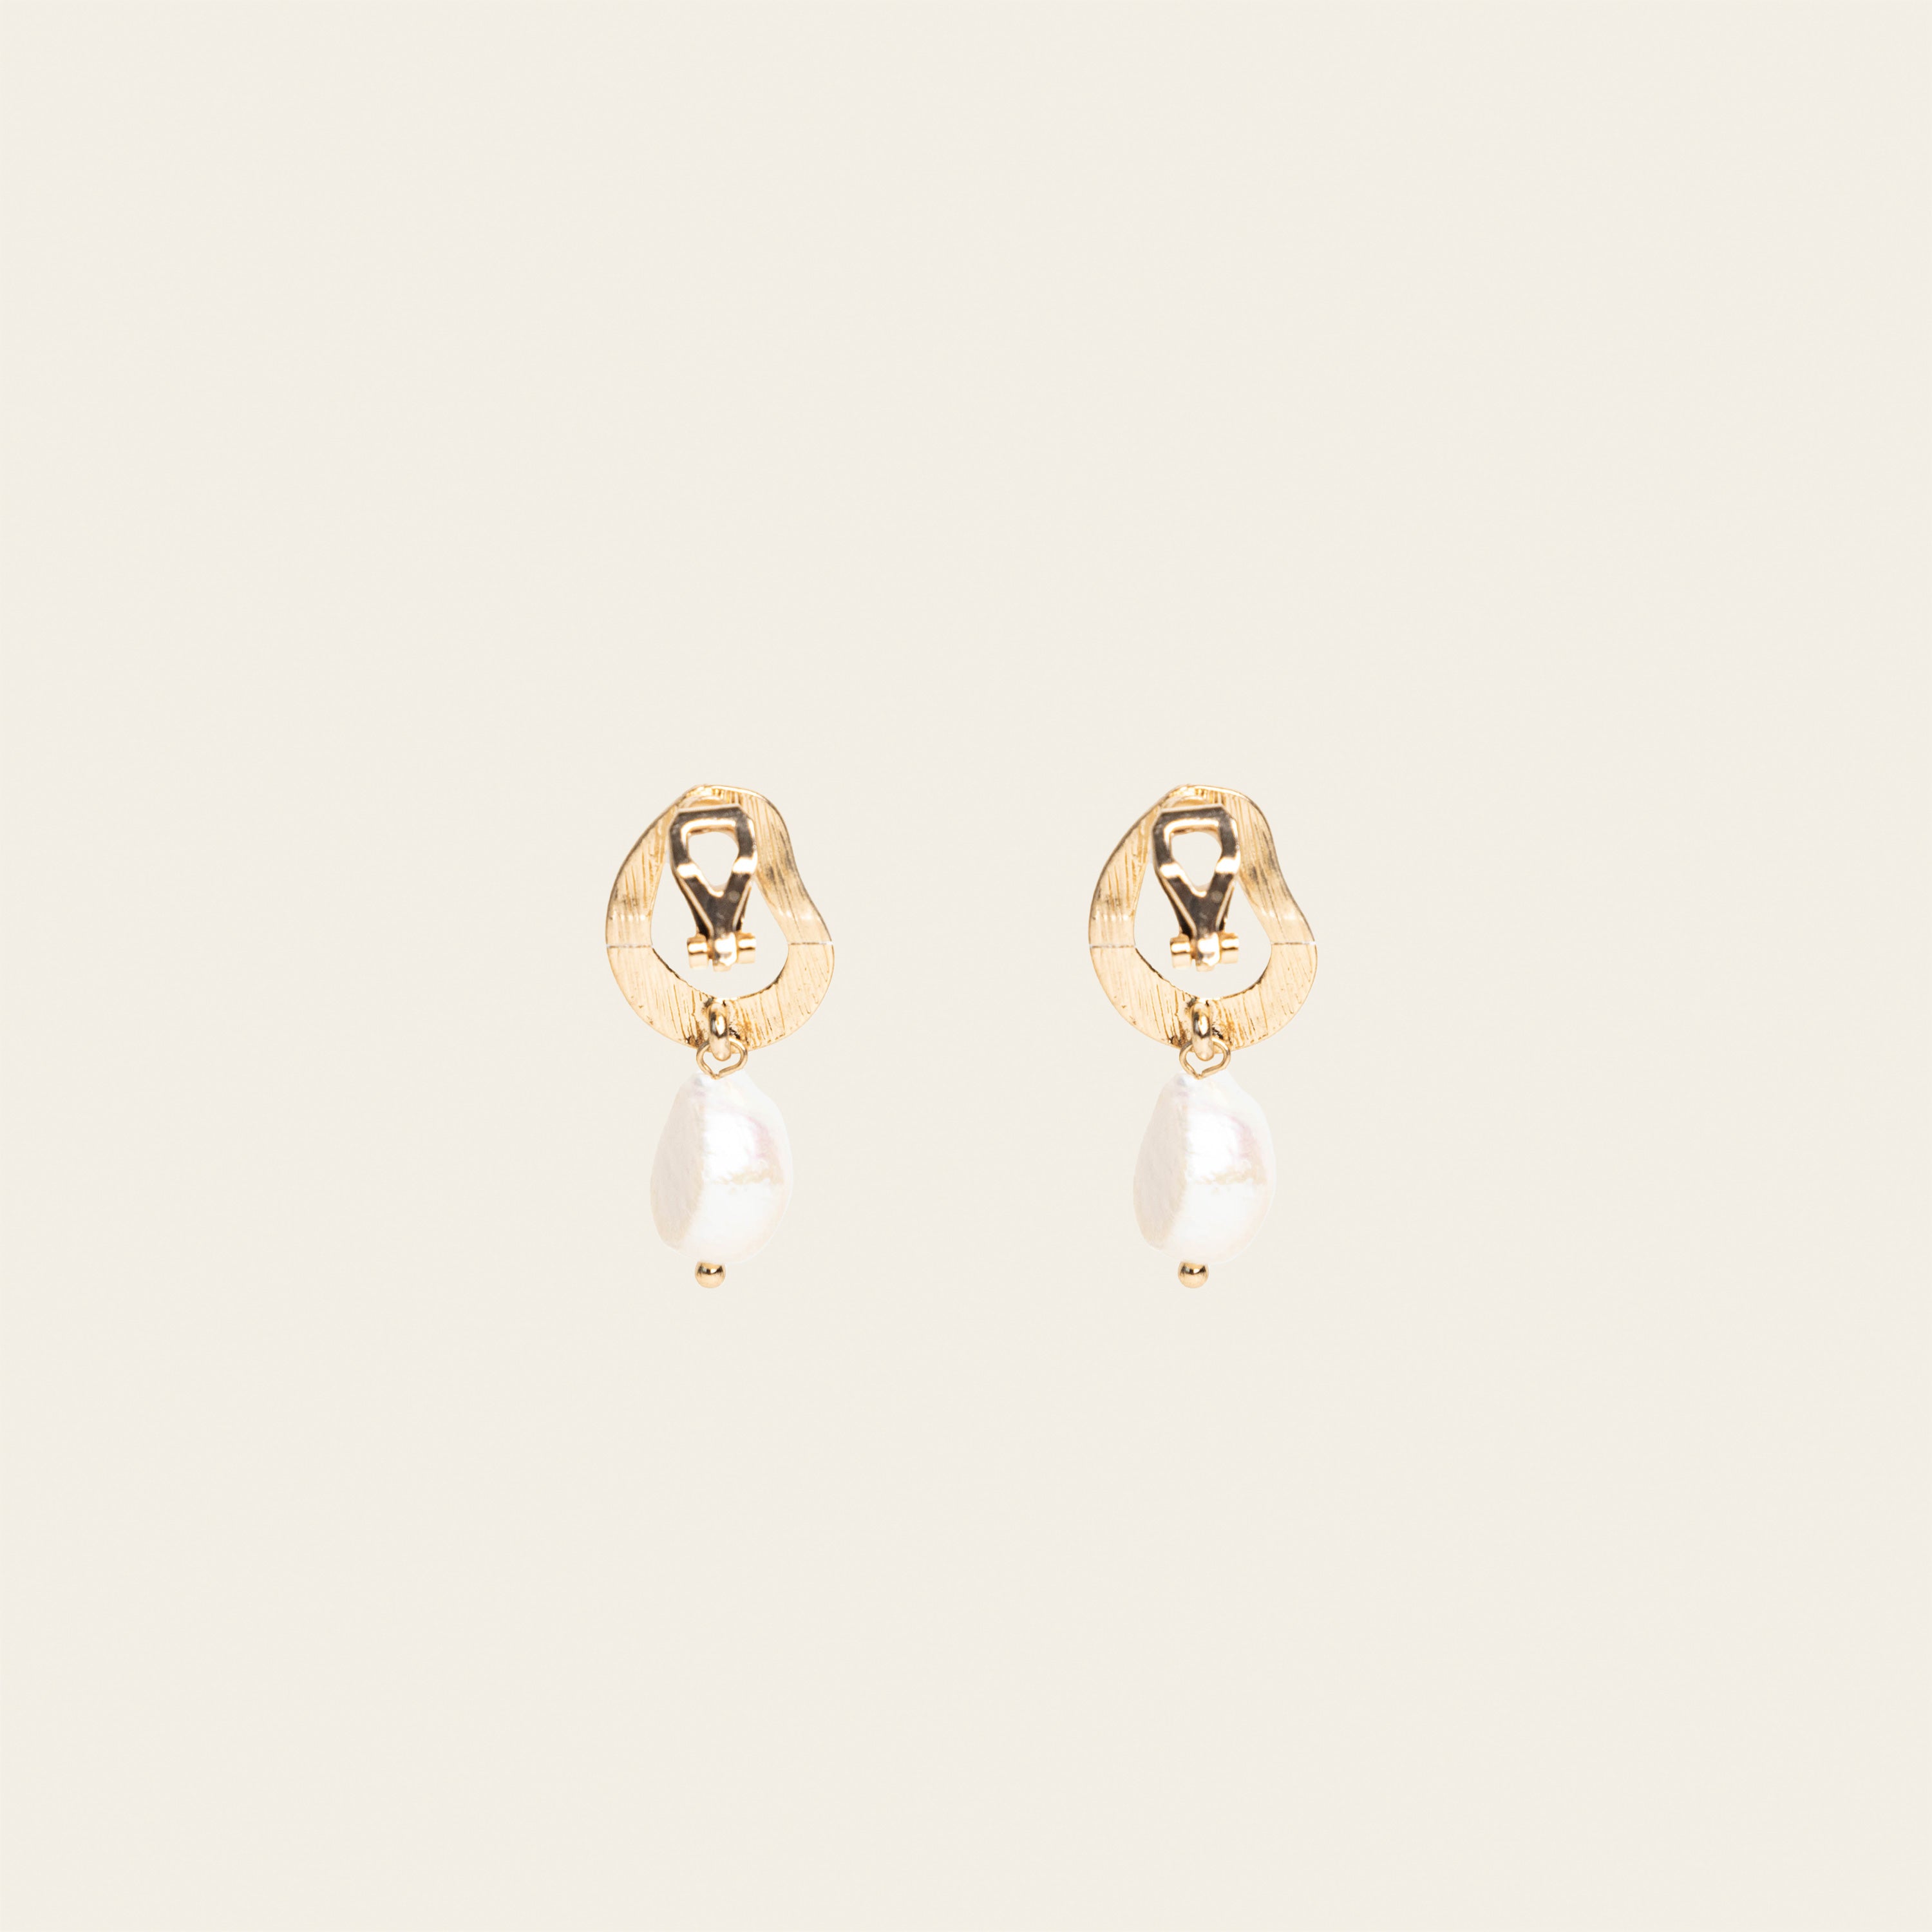 Image of the Ella Clip On Earrings. Perfect for sensitive or stretched ears, they provide a 24-hour hold and adjustable fit for unmatched comfort. Effortlessly add a touch of elegance to your look.